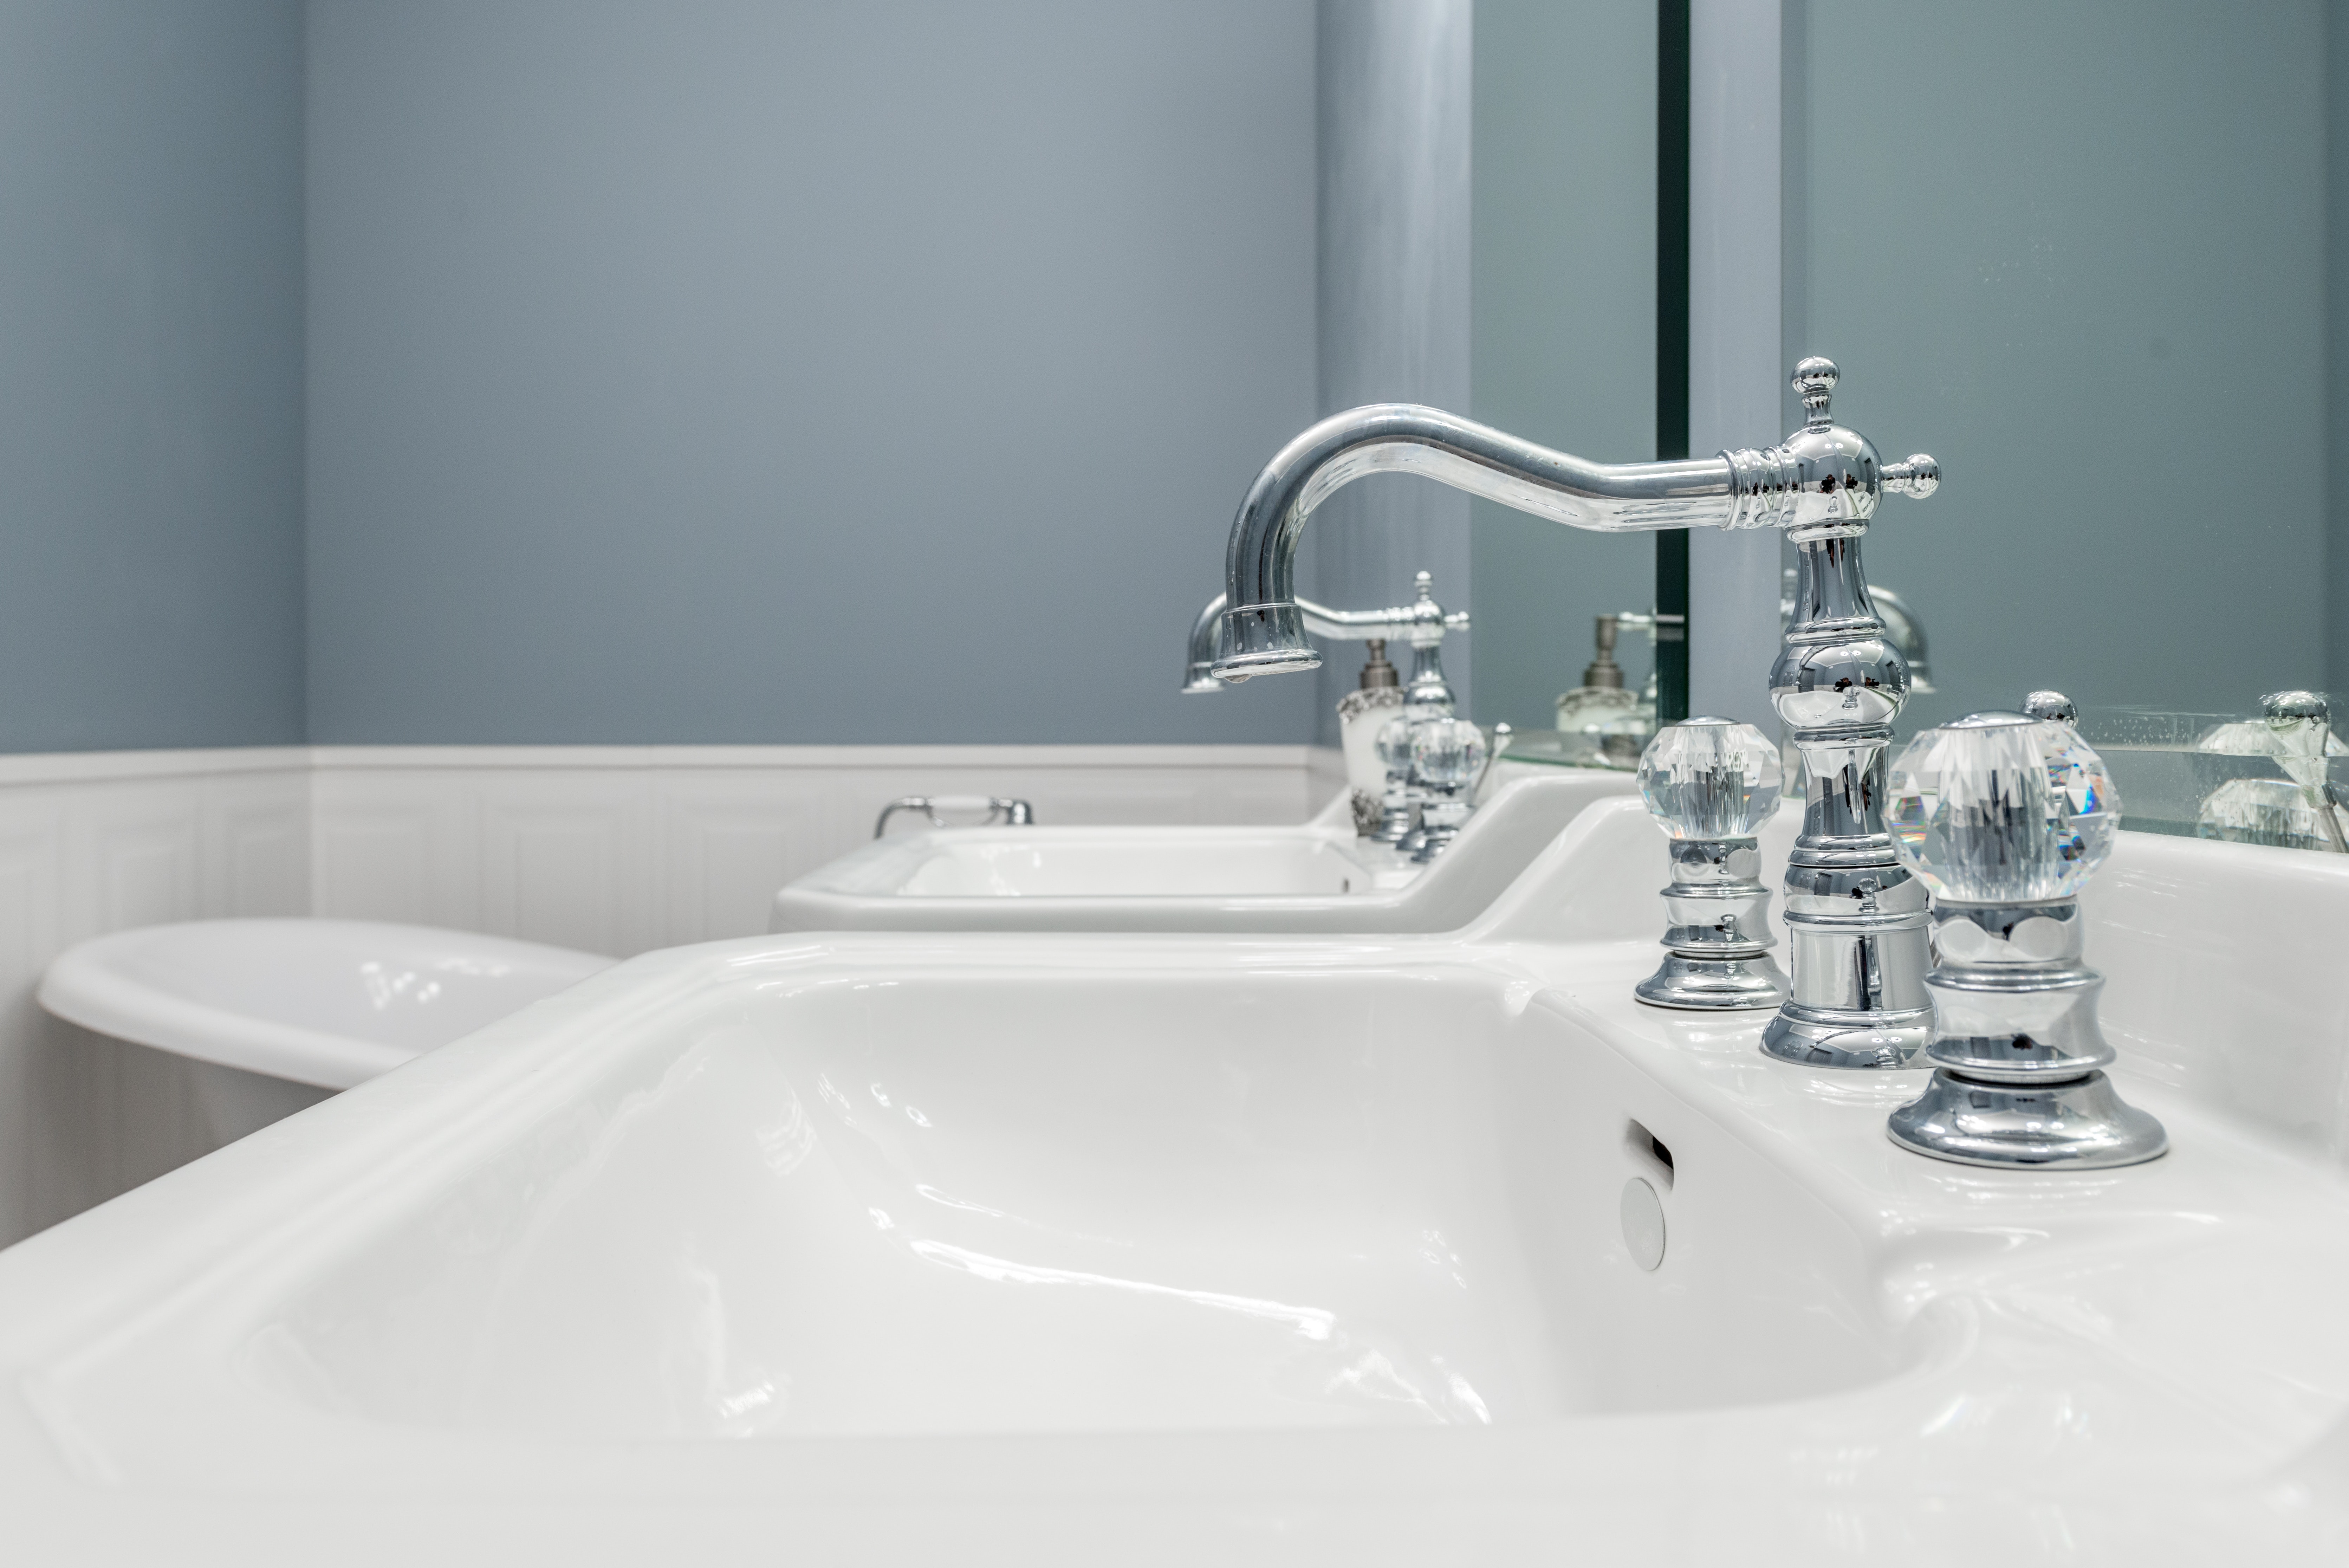 White bathroom basin with stylish traditional taps